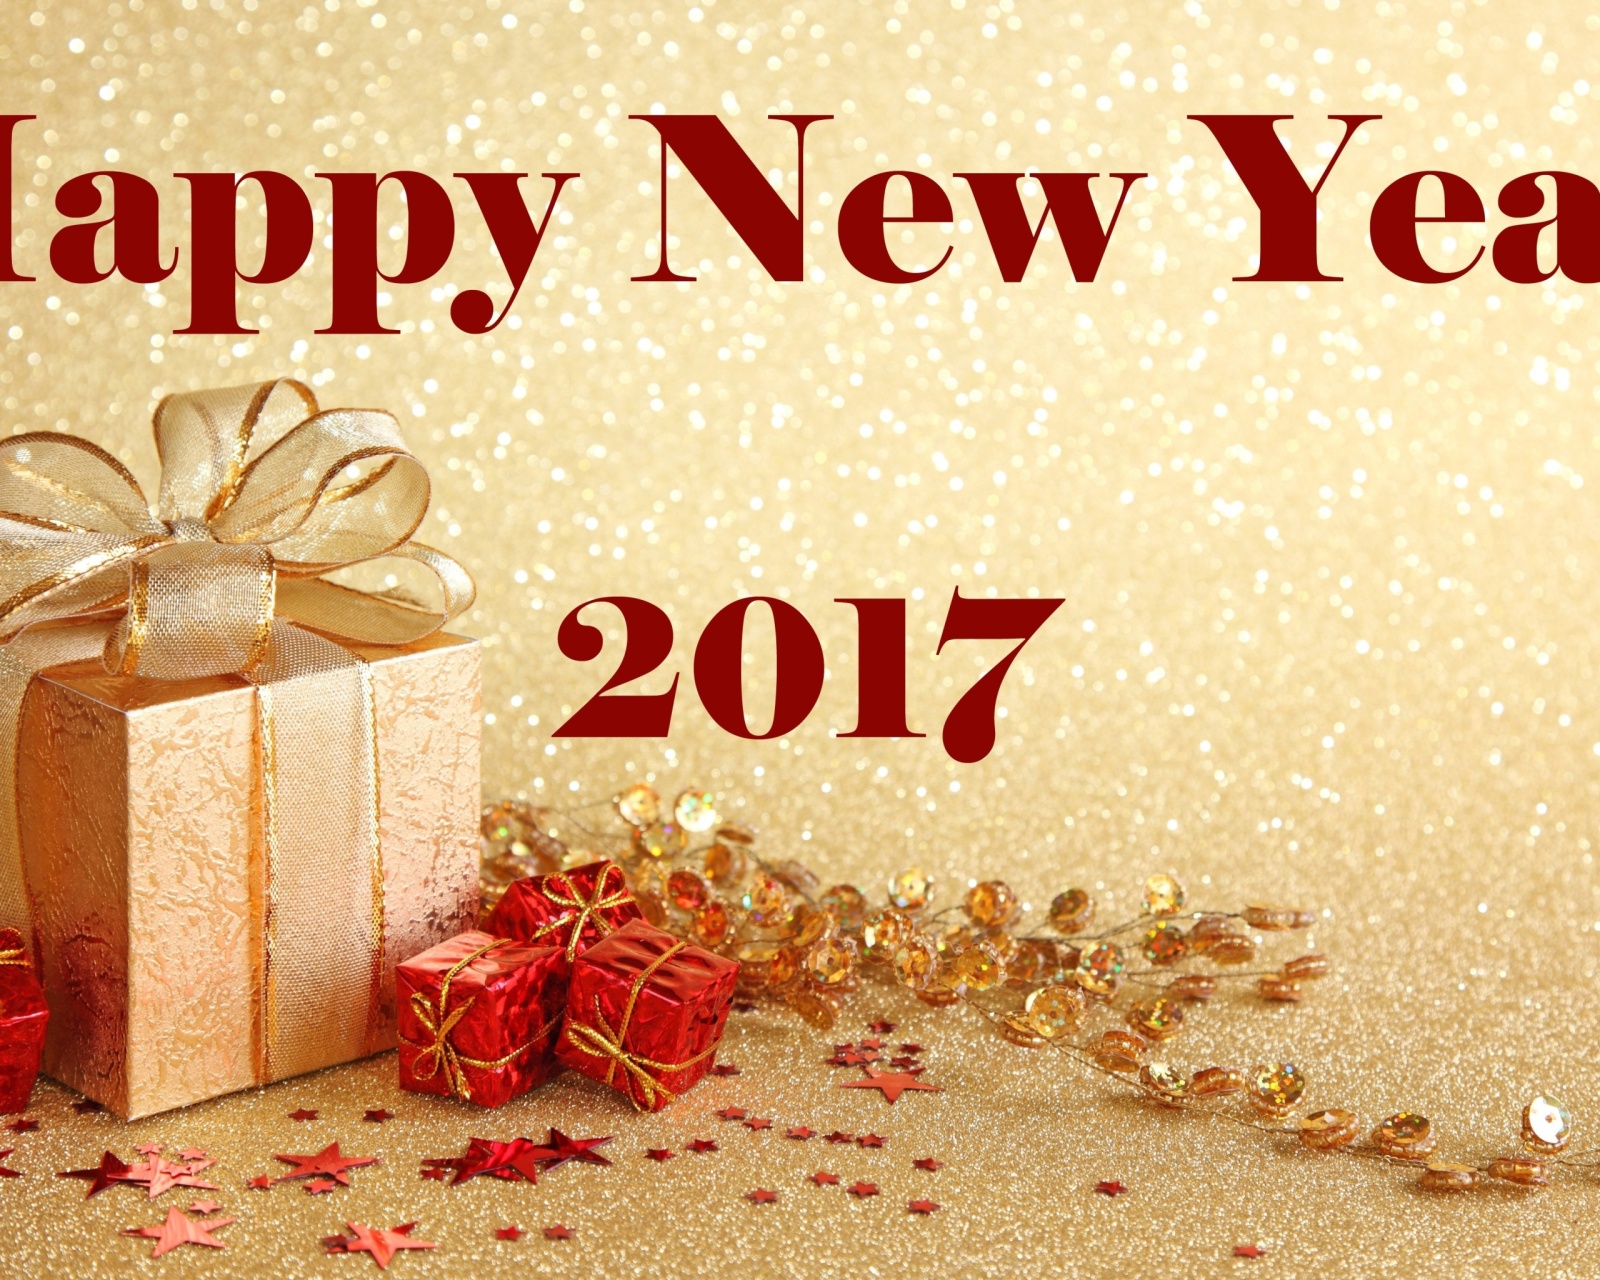 Happy New Year 2017 with Gifts wallpaper 1600x1280